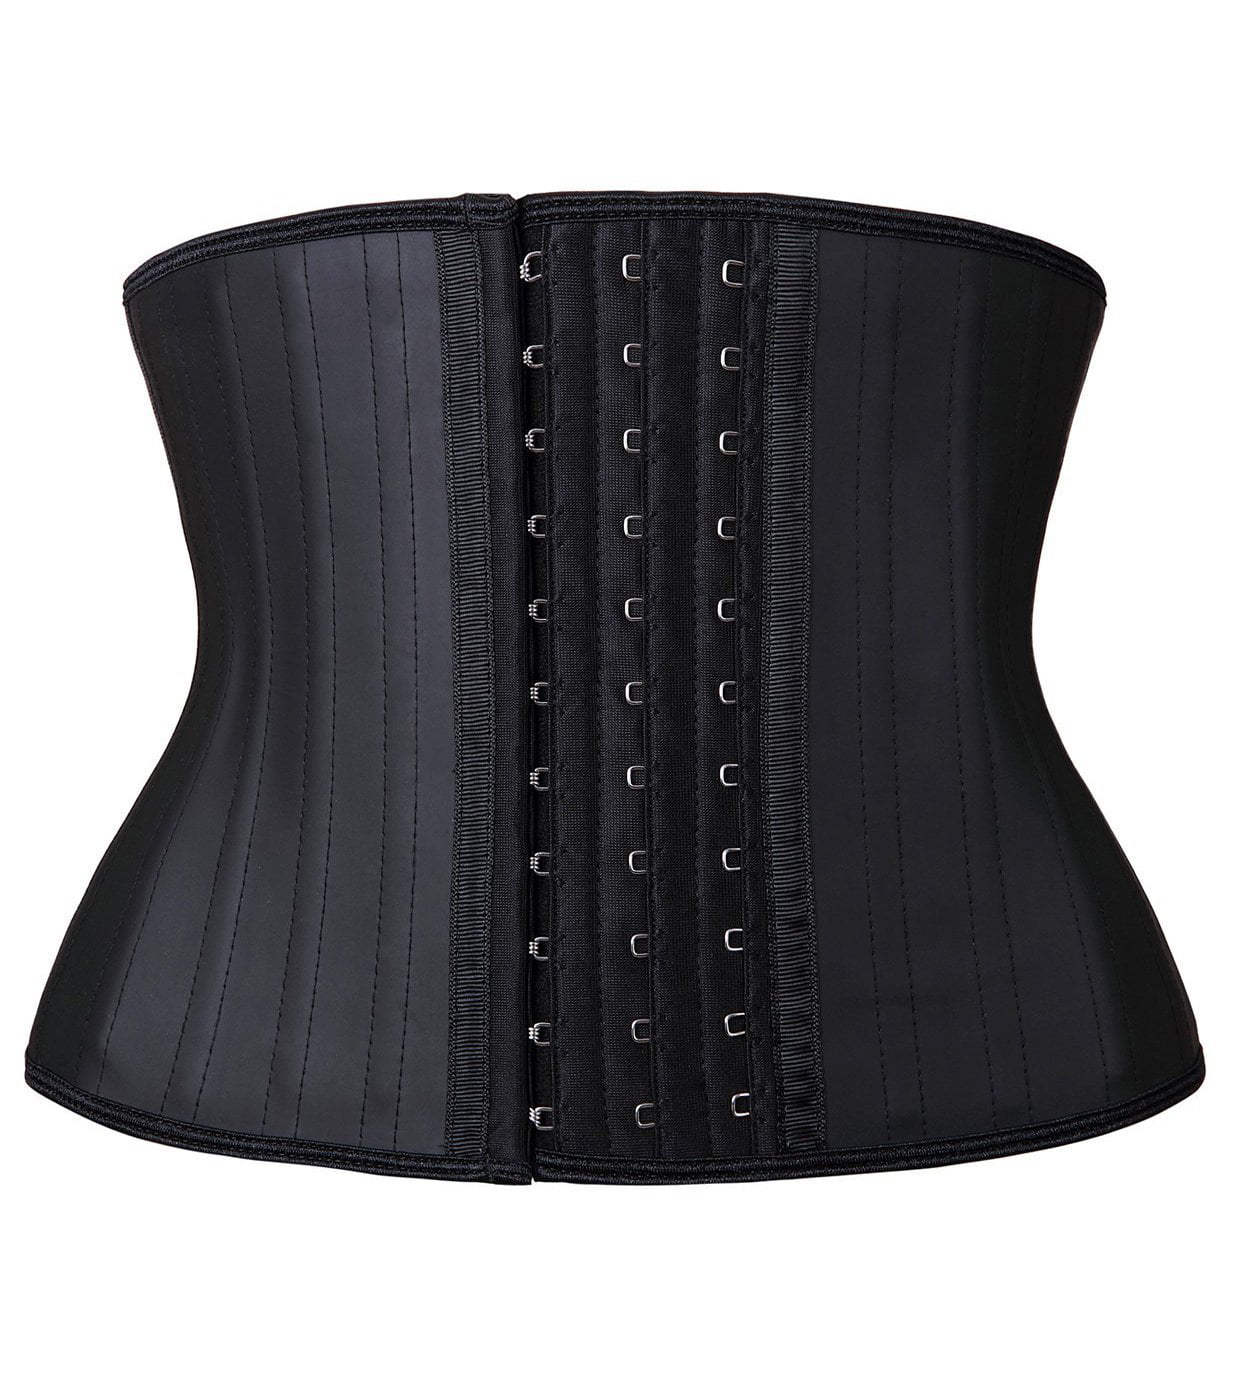 YIANNA Women's Underbust Breathable Short Torso Latex Waist Trainer Corset  for Tummy Control Sports Workout Hourglass Body Shaper Black-M 